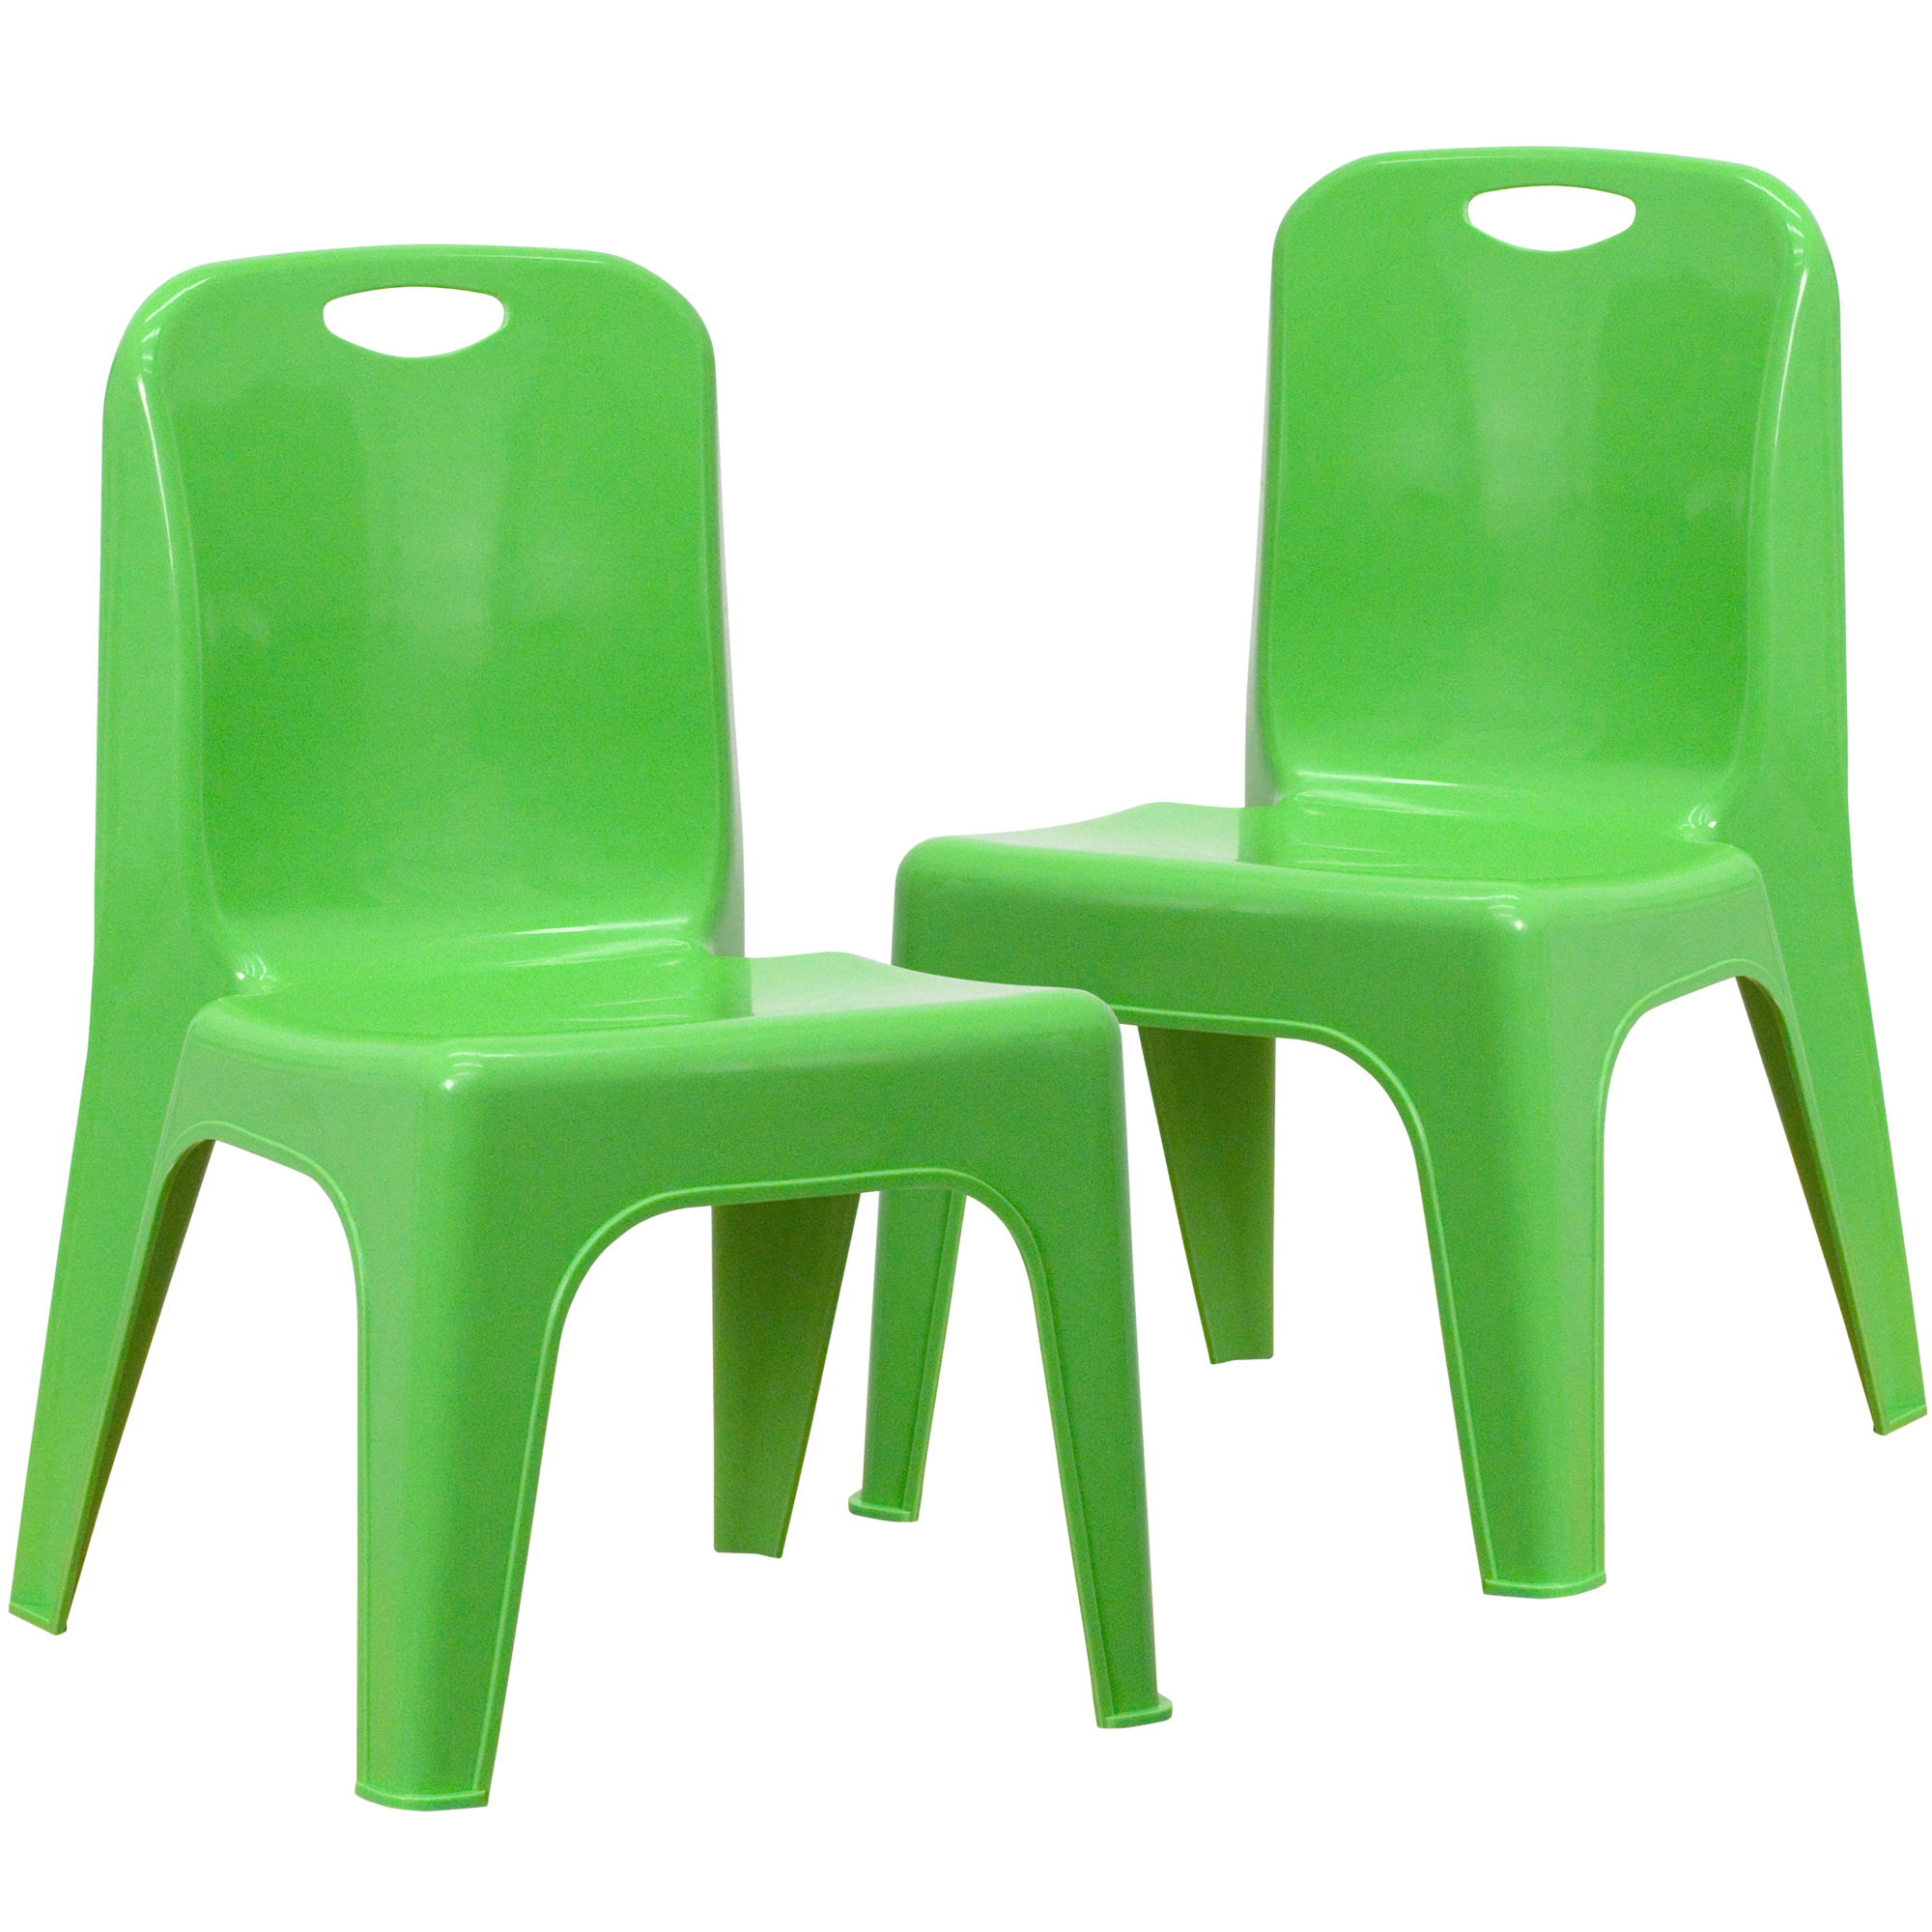 Flash Furniture, 2 Pack Green Plastic Stack School Chair-11Inch H Seat, Primary Color Green, Included (qty.) 2, Model 2YUYCX011GREEN